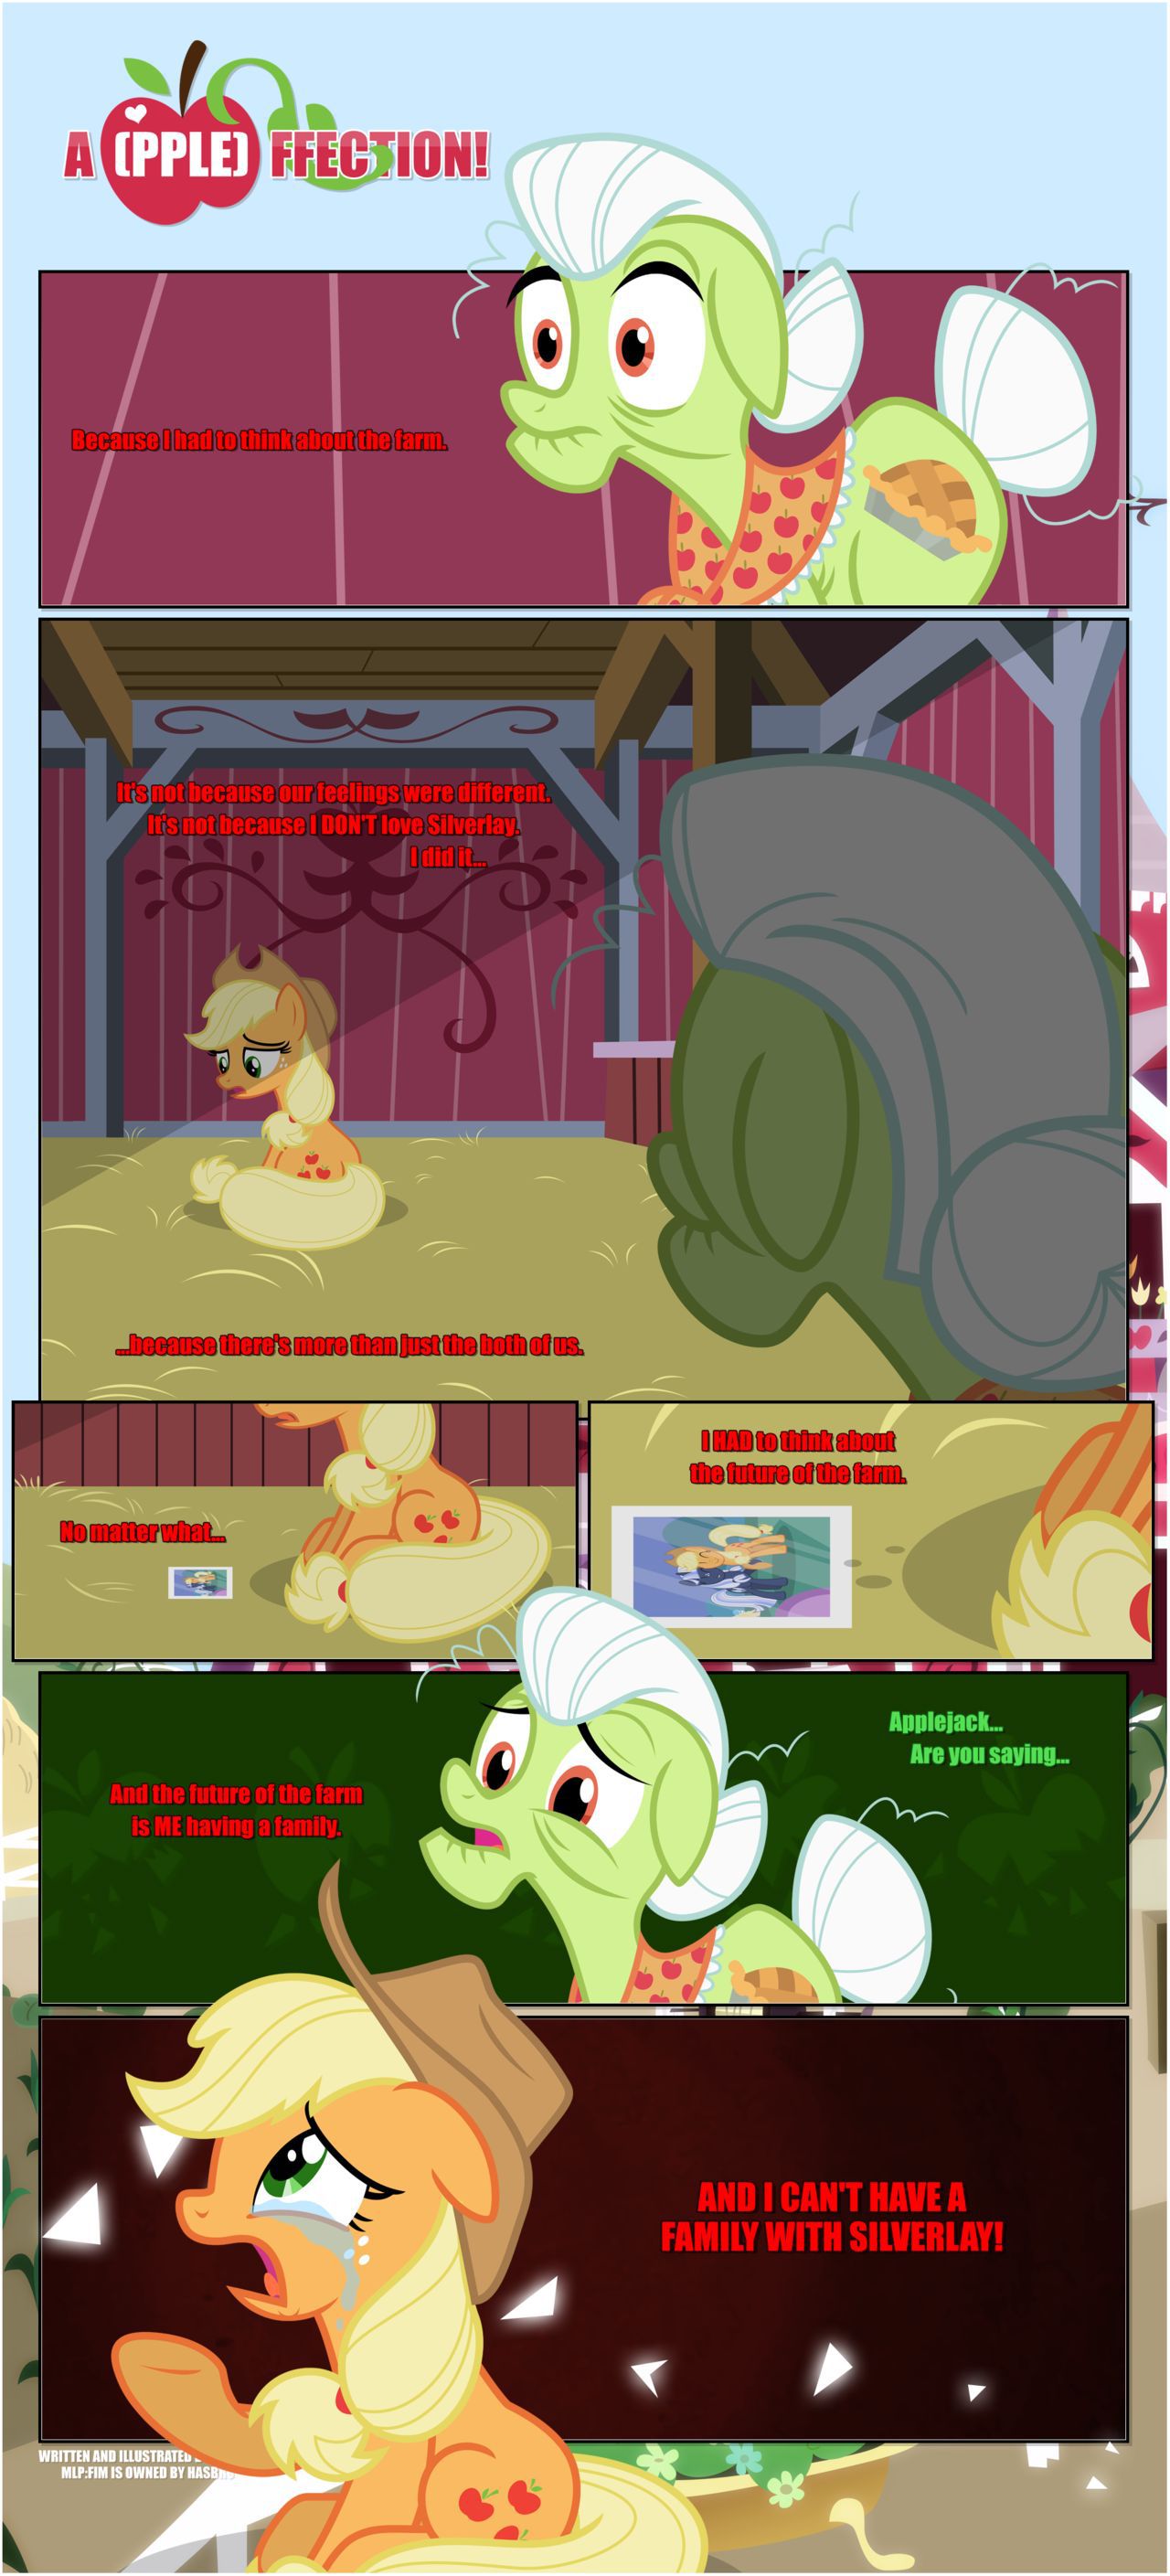 [EStories] Appleffection (My Little Pony Friendship is Magic) [Ongoing] 88